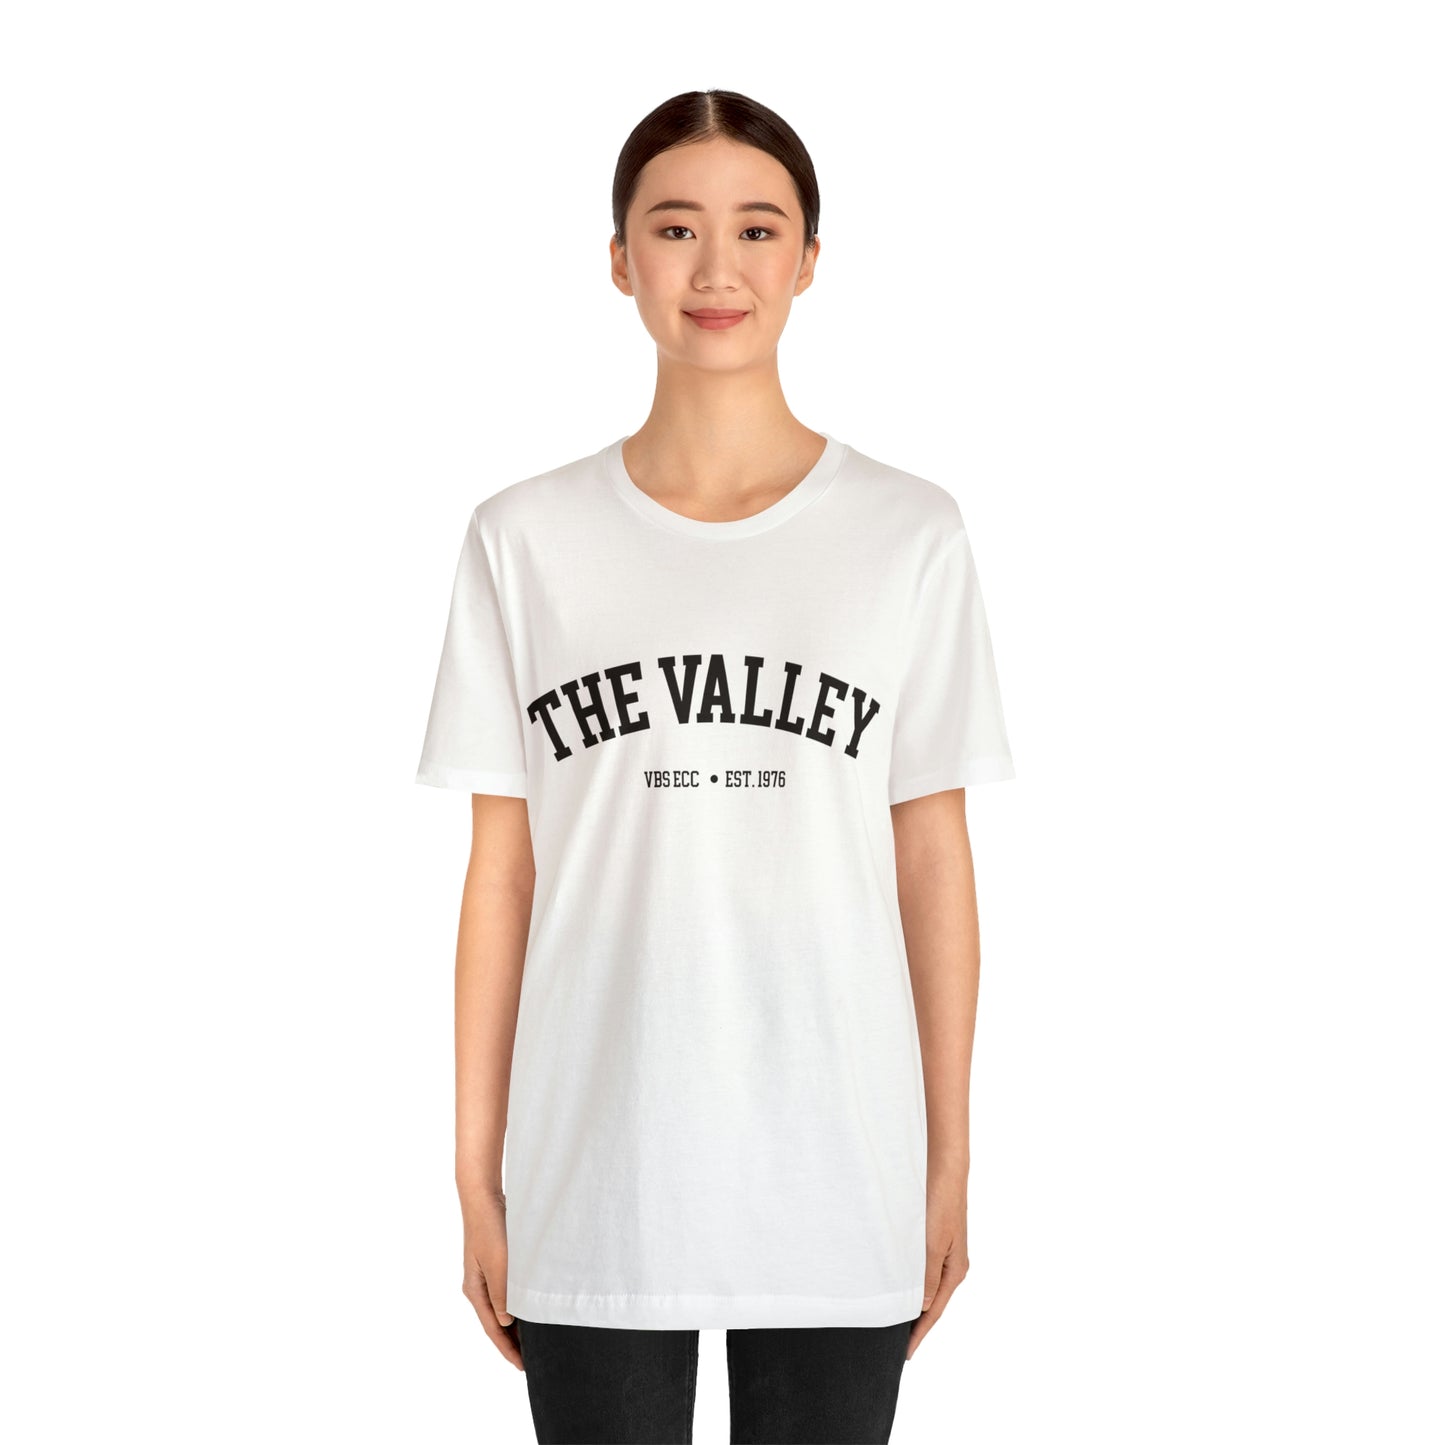 "The Valley" Tee